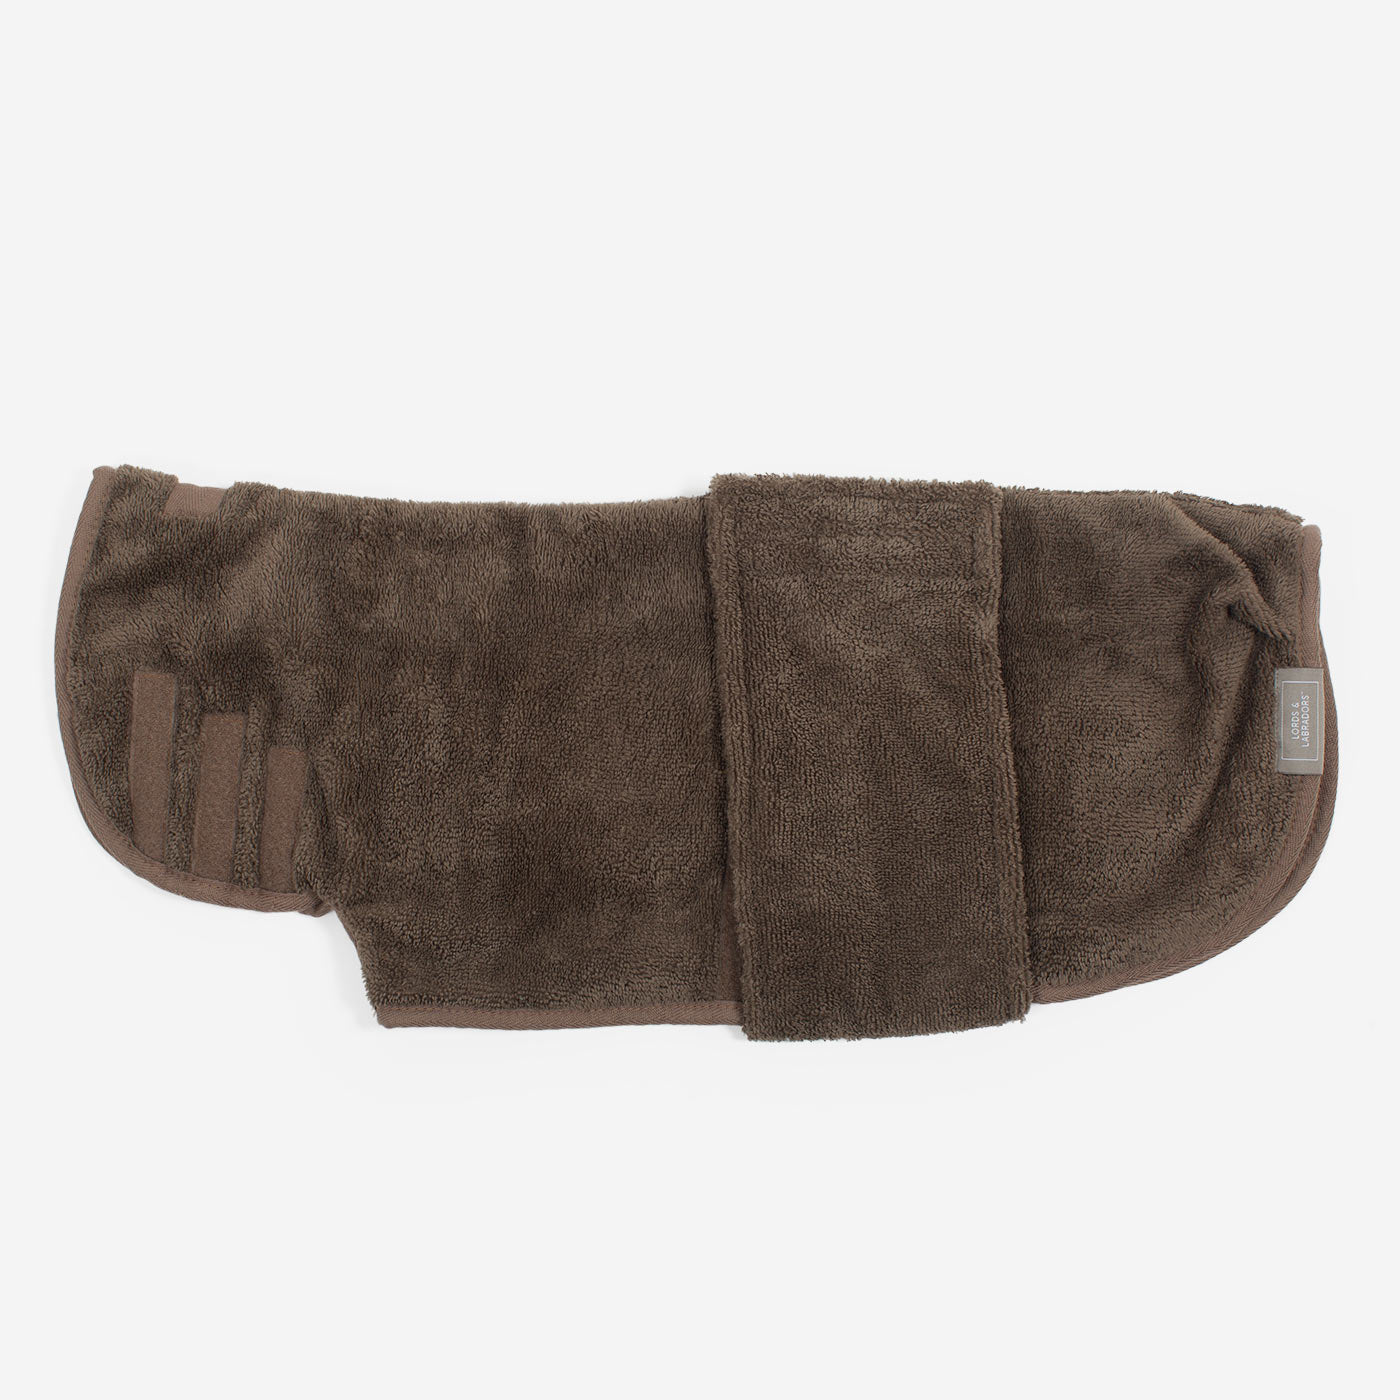 Discover the perfect dog drying with our bamboo dog drying coat in Mole (Brown) The ideal choice for pet drying after walking and bath-time. Made using luxurious bamboo to aid sensitive skin! Available to personalize now at Lords & Labradors US, in 5 sizes and 4 beautiful colors!